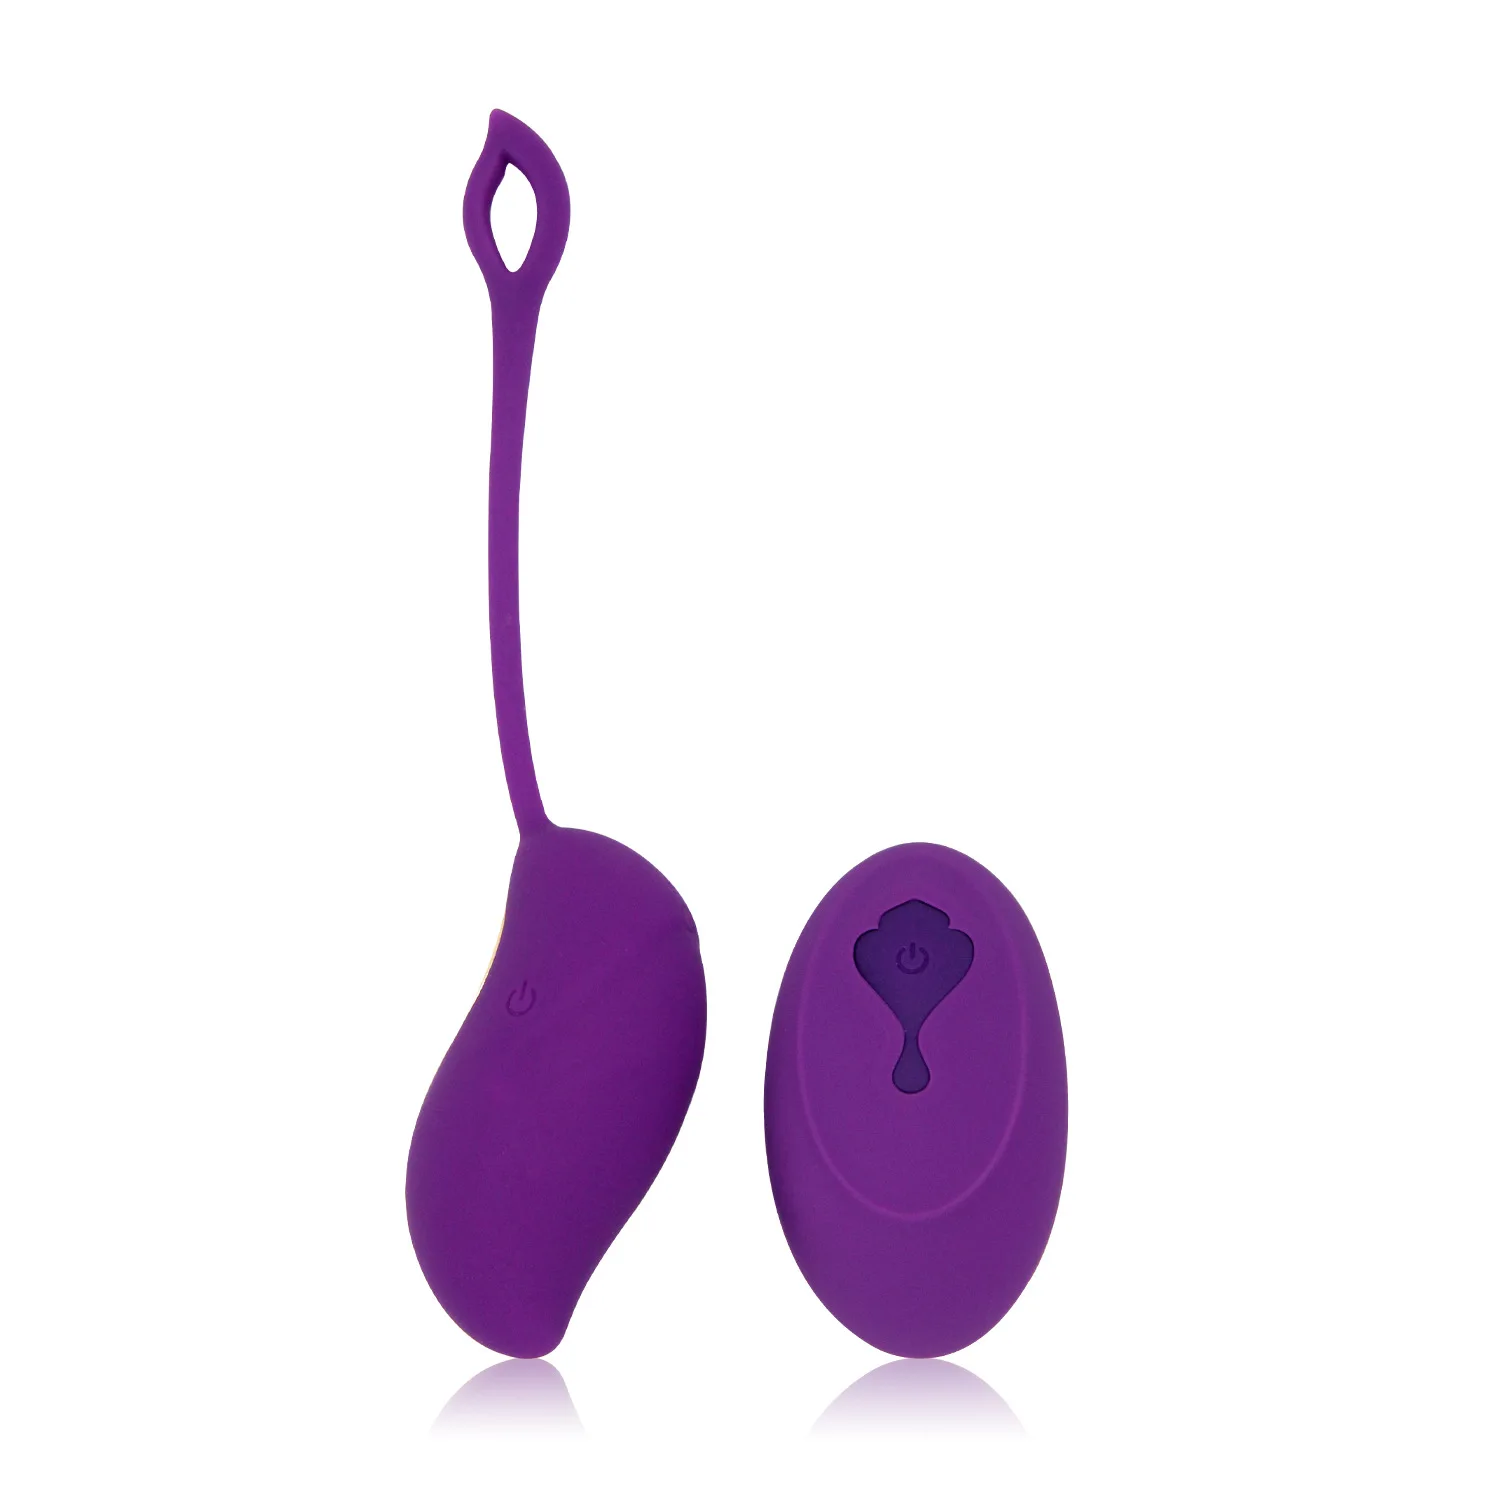 

Wireless Remote Control Eggs Vibration Silica Gel USB G-point Speed Regulation Vibration Egg Female Adult Supplie for Adult Toys